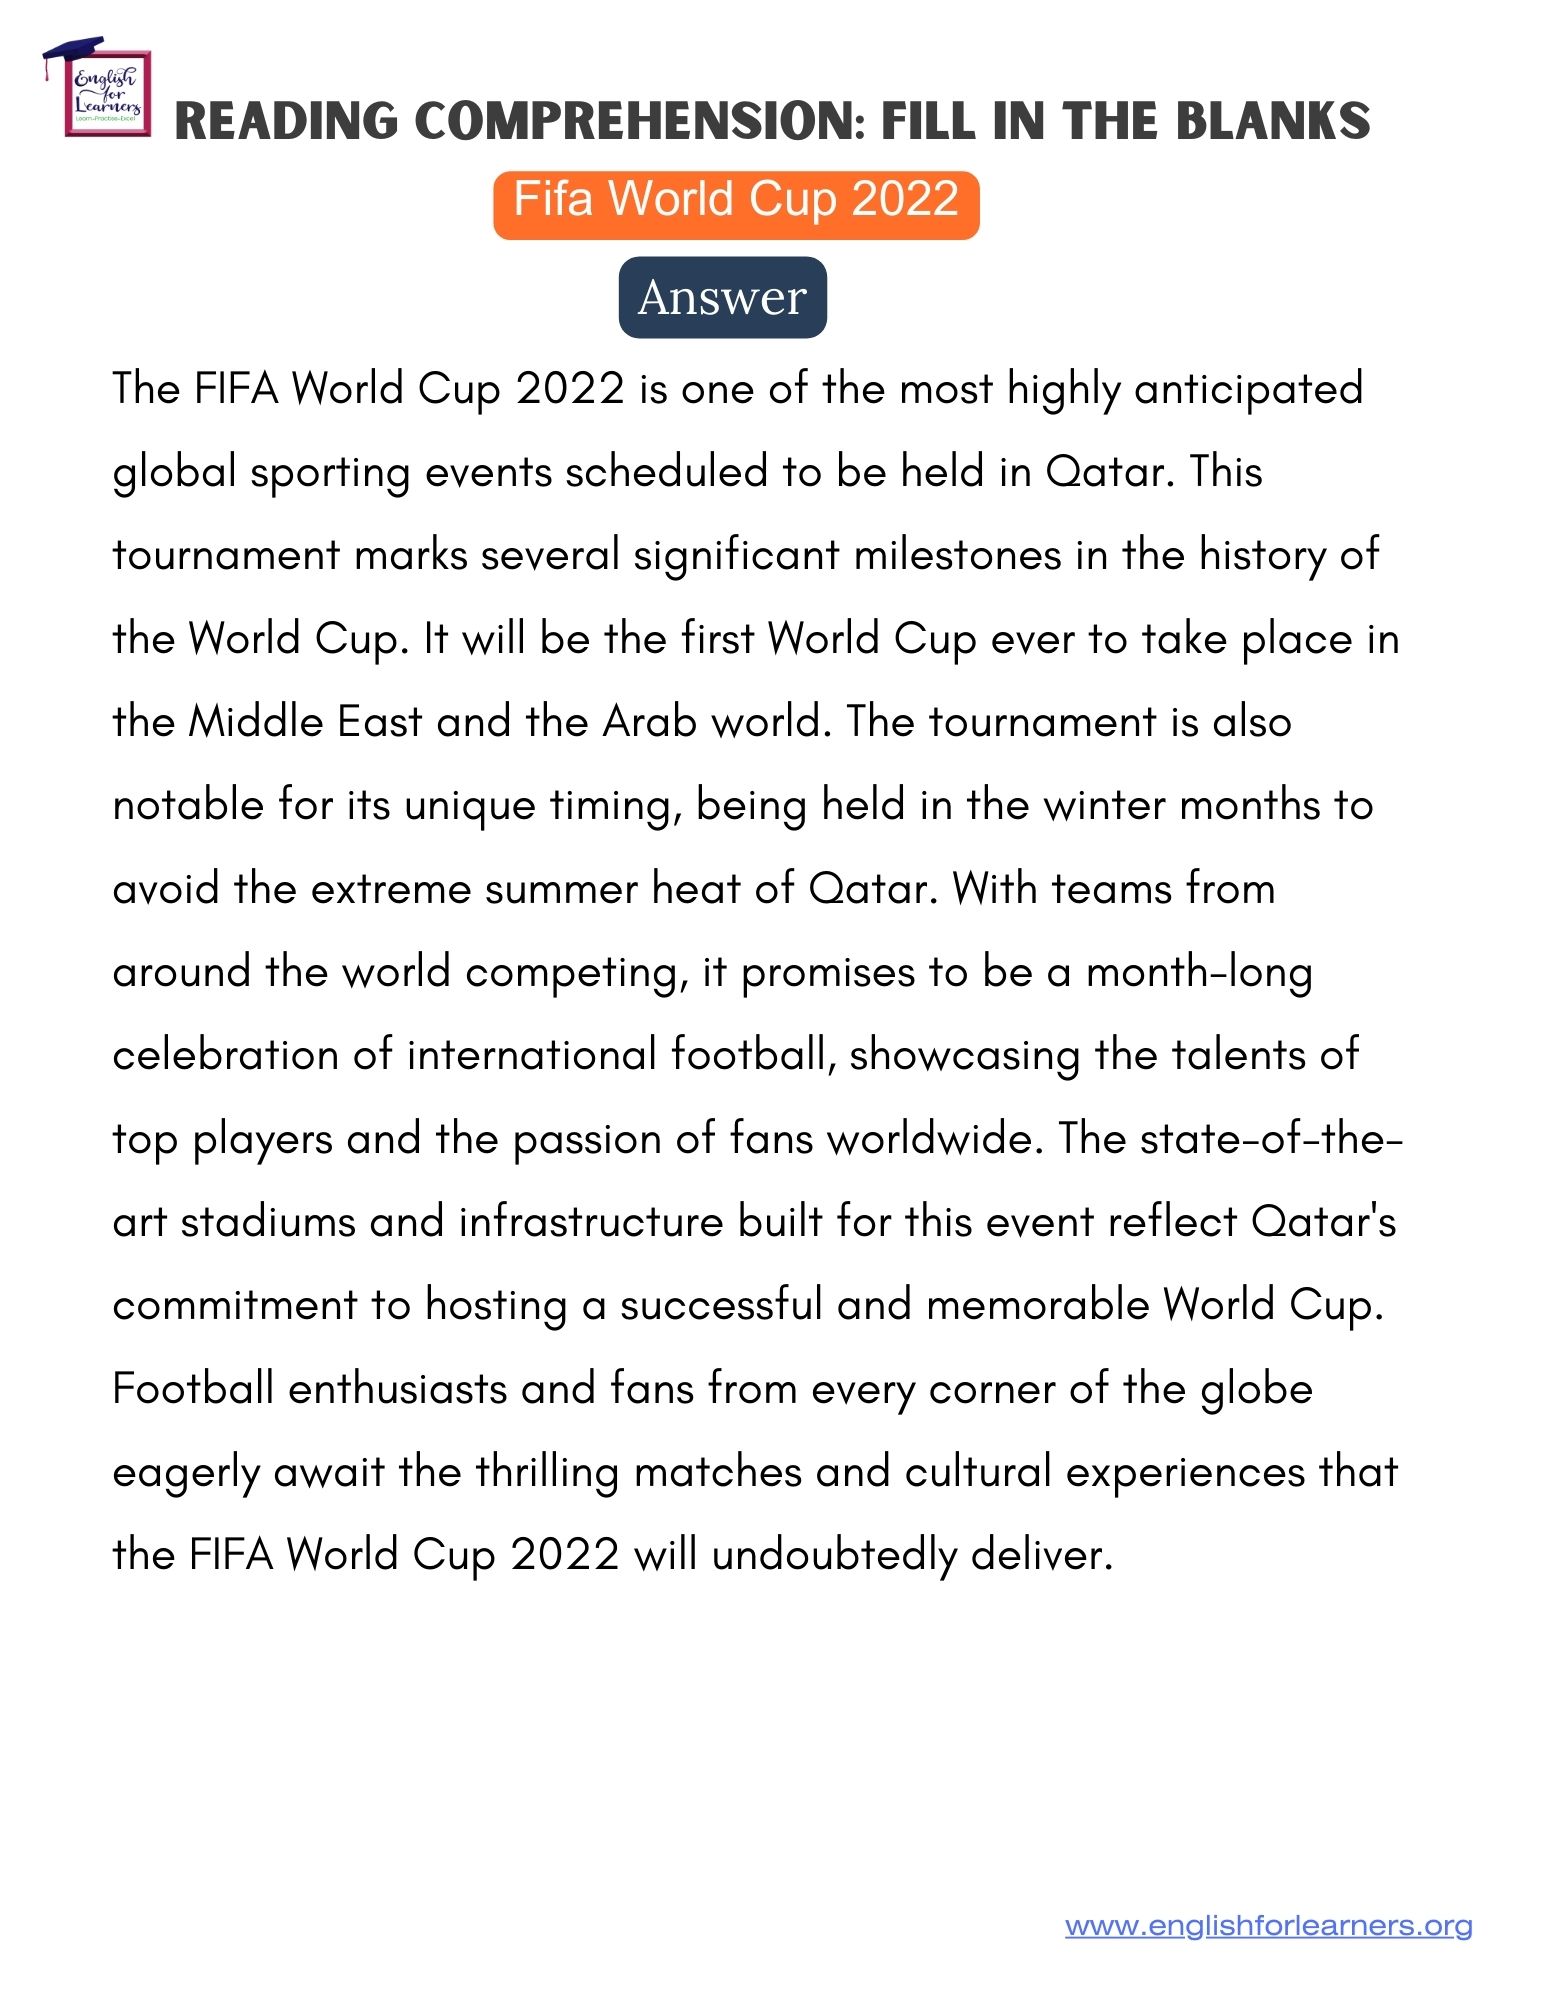 Fill in the Blanks Exercise FIFA World Cup 2022, reading comprehension exercise,fifa World Cup reading comprehension